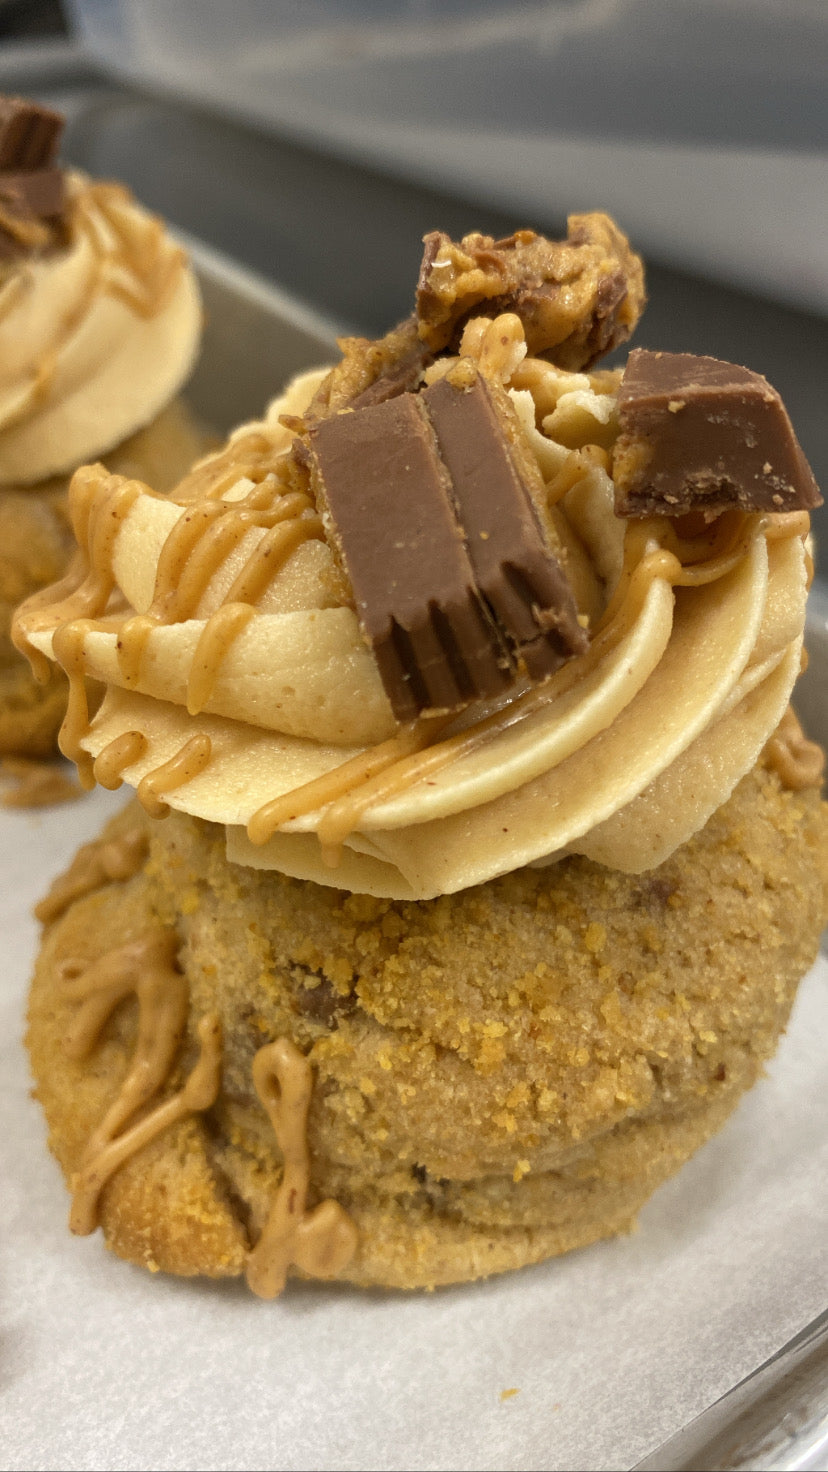 Peanut Butter Cheesecake Cookies - Mcks' Cupcakes in South Florida